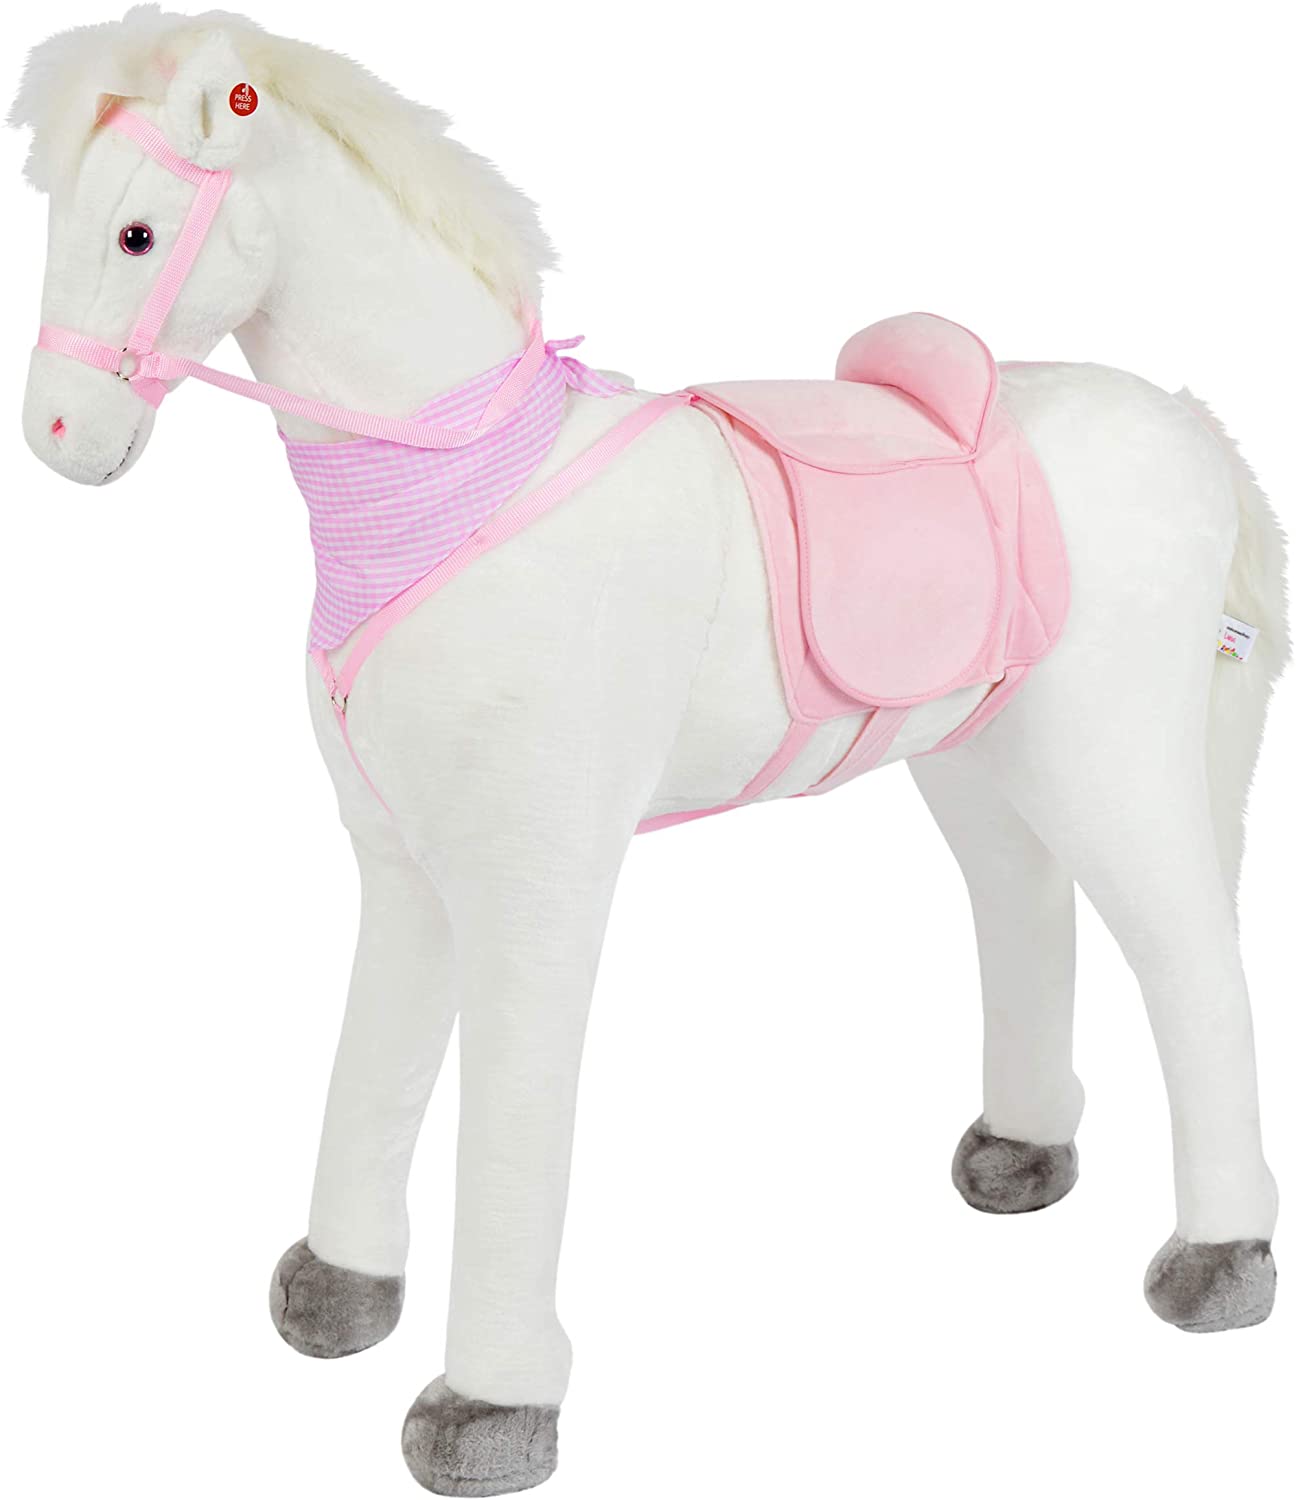 Plush Horse, XXL 105 cm – The Giant Horse, For Riding, A Great Standing Horse XXL up to 100 kg, Play Horse with Brush for Sitting On  – A Child\'s Dream.